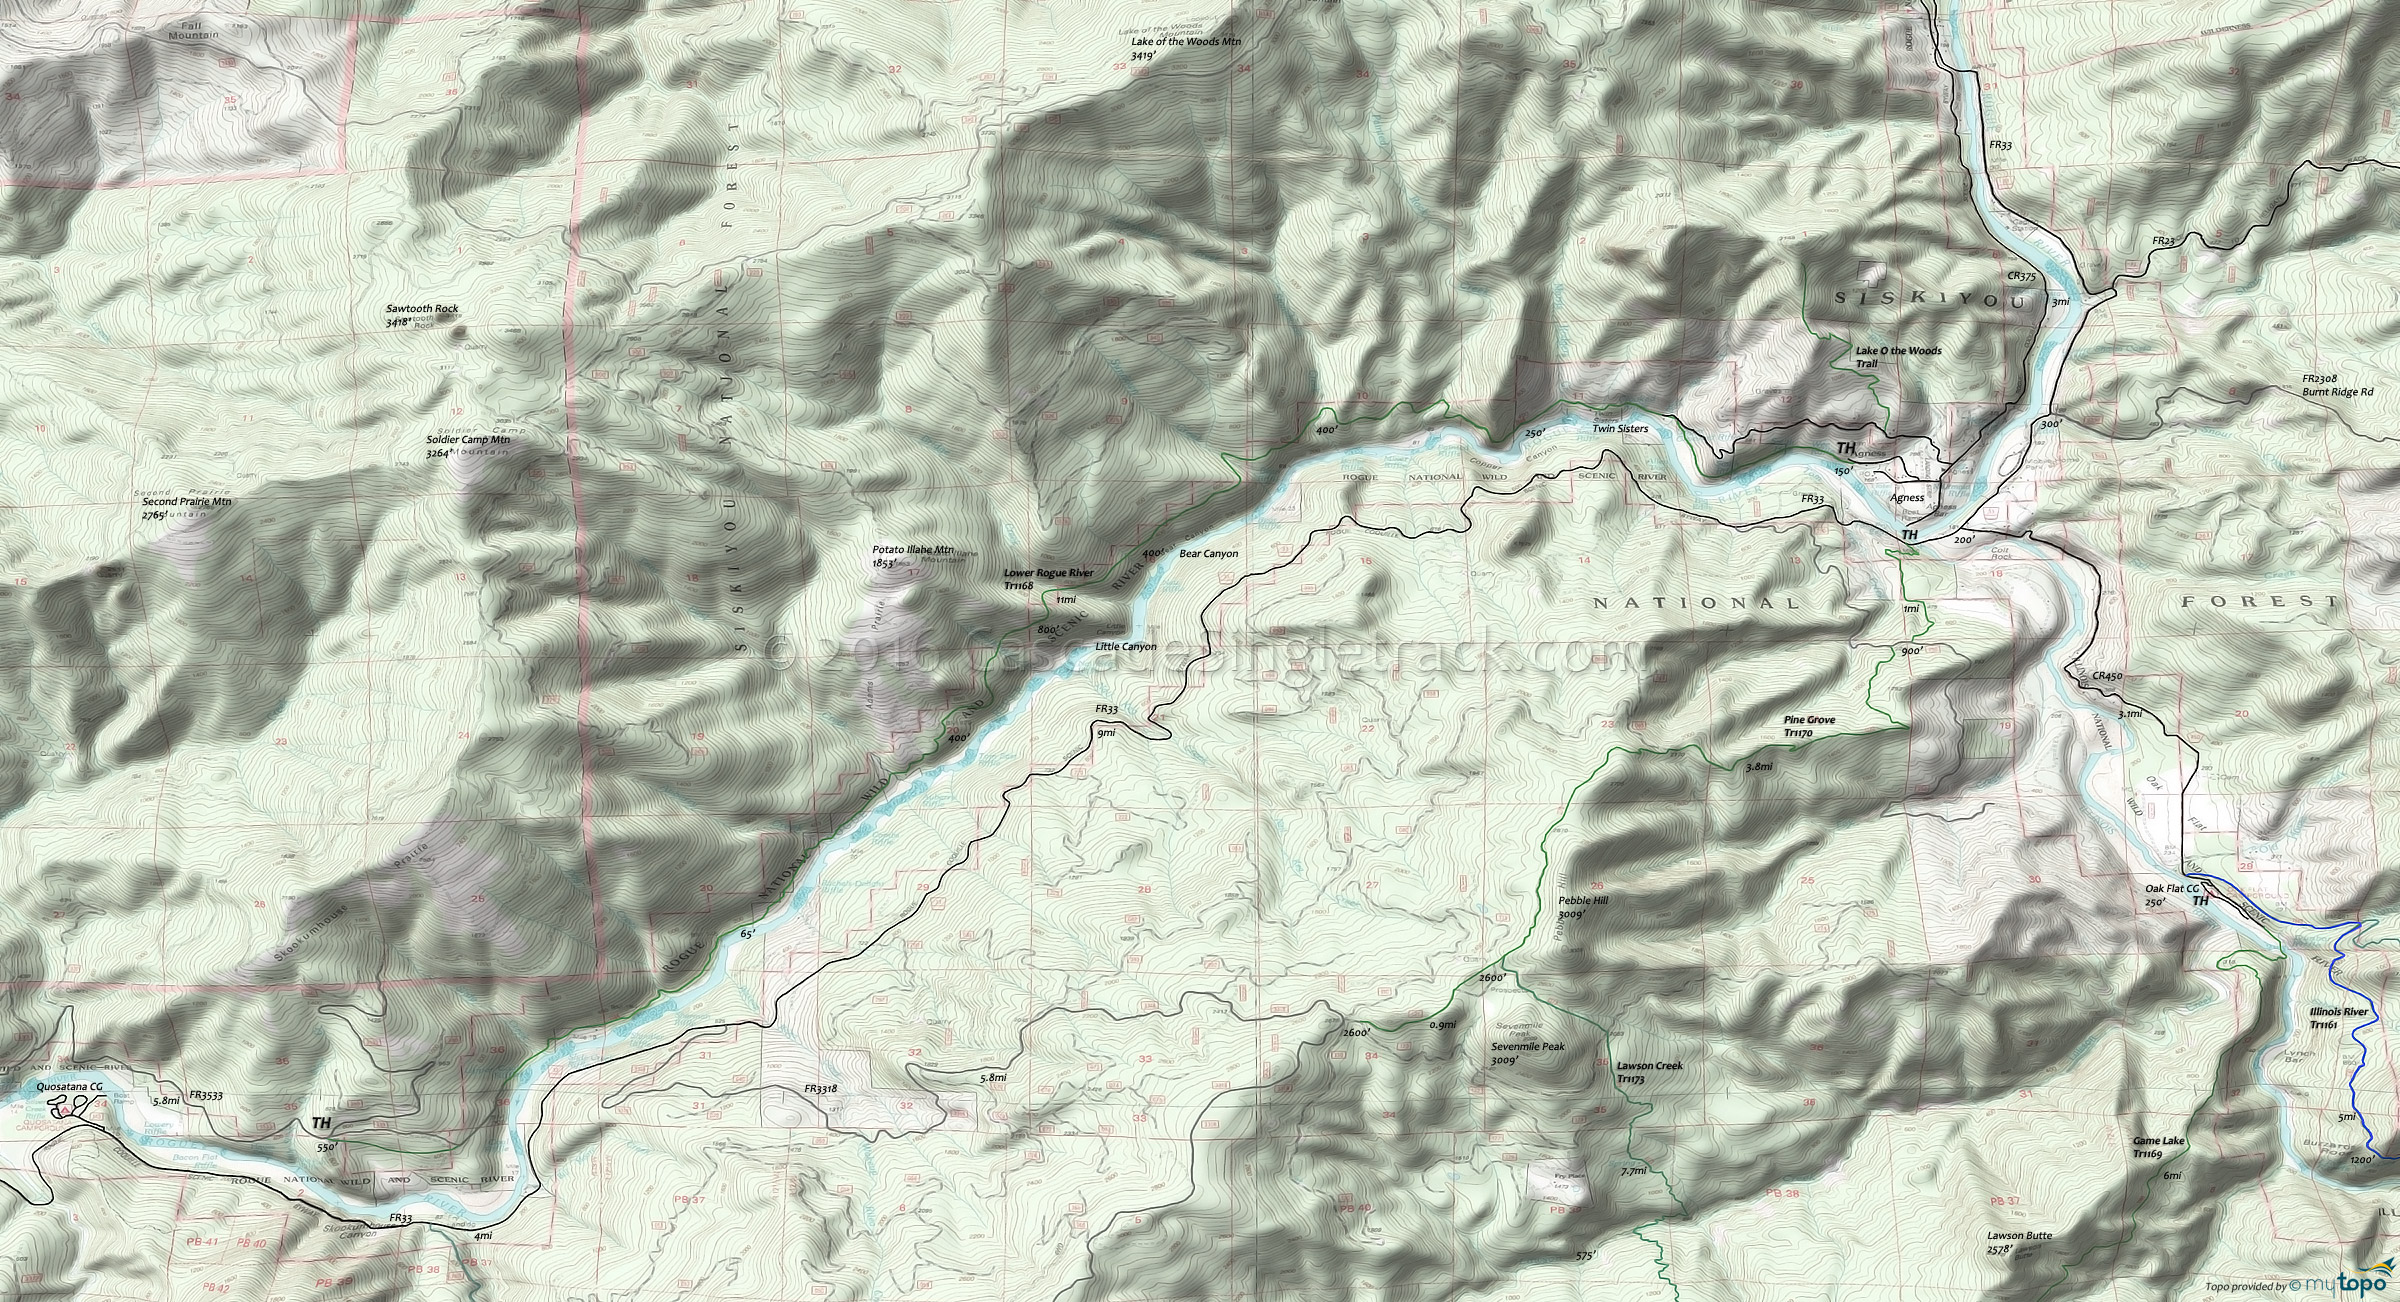  Lower Rogue River Tr1168 Area Topo Map